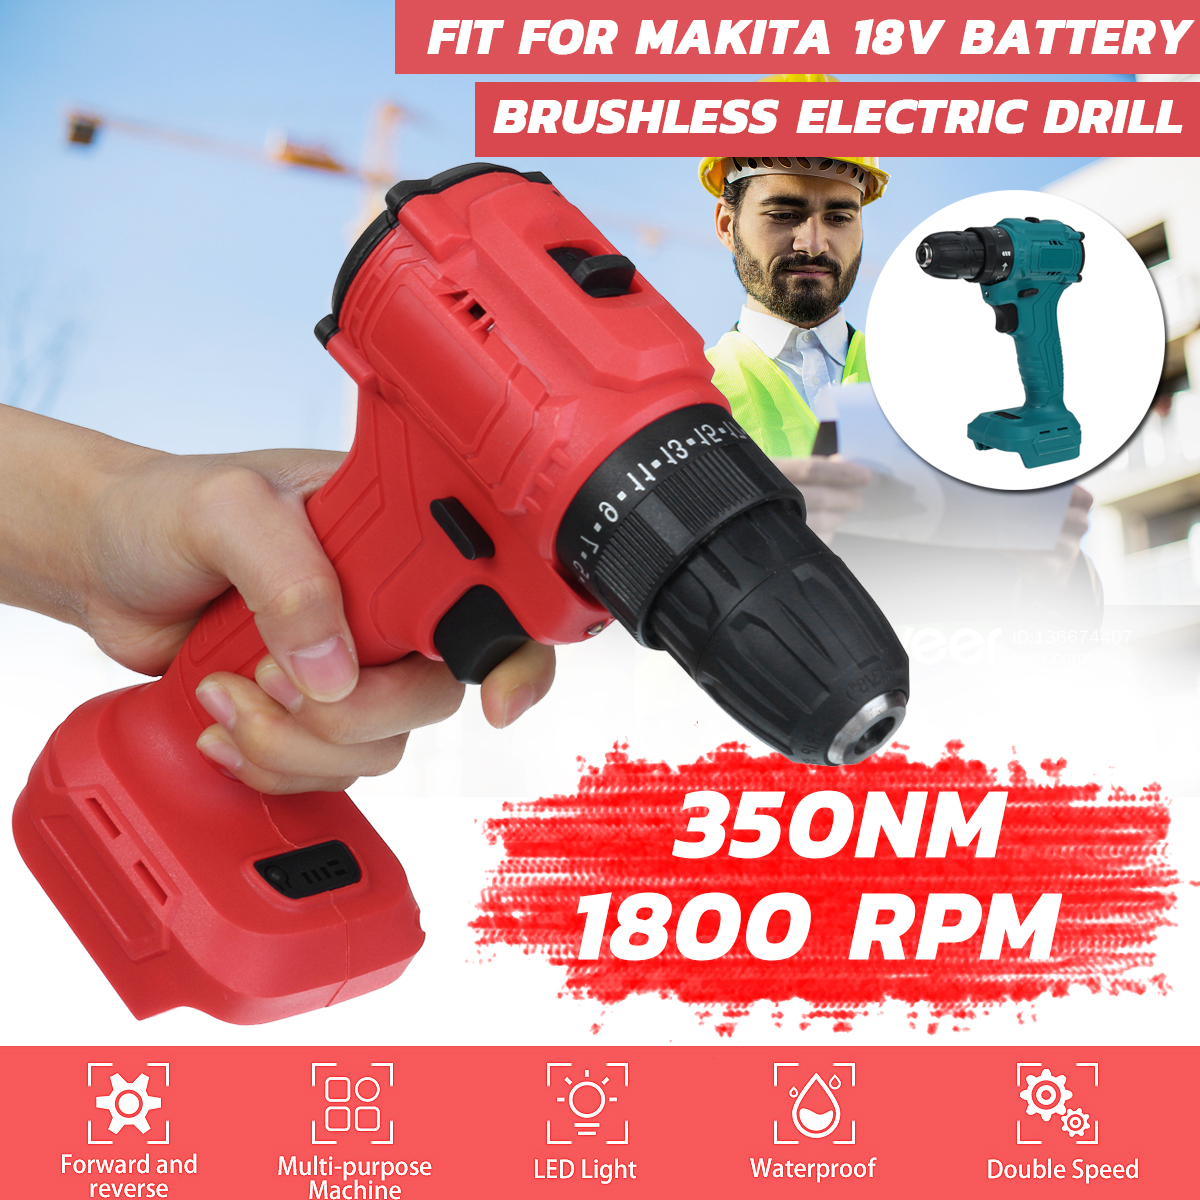 350Nm-1800rpm-Brushless-Electric-Drill-LED-Rechargeable-Power-Drill-For-Makita-18V-Battery-1735667-1